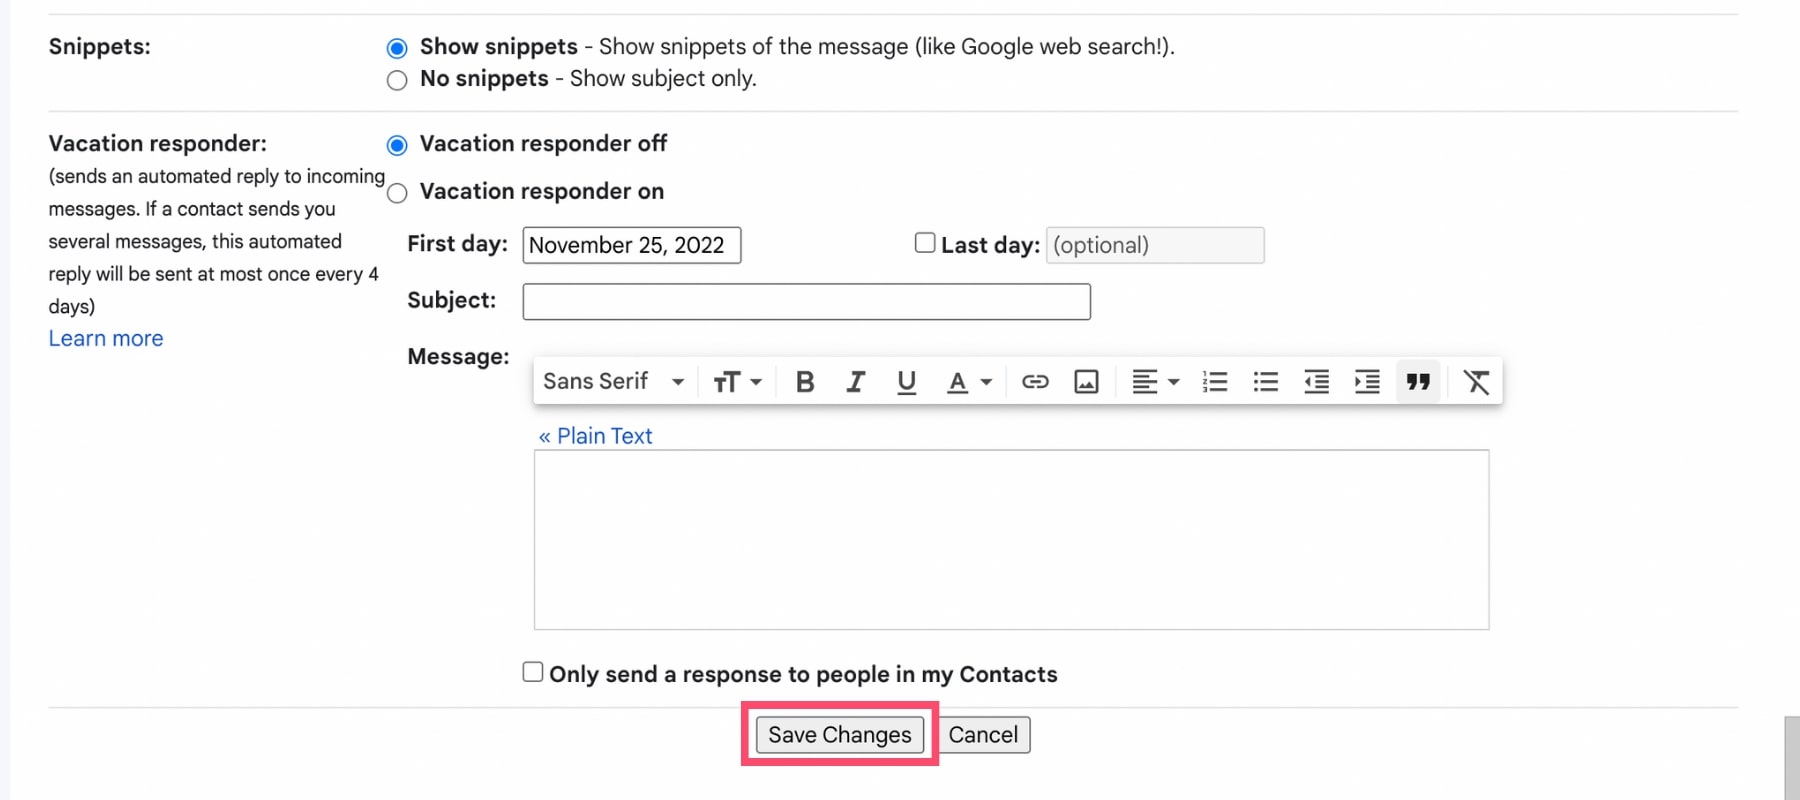 Save your changes in Gmail